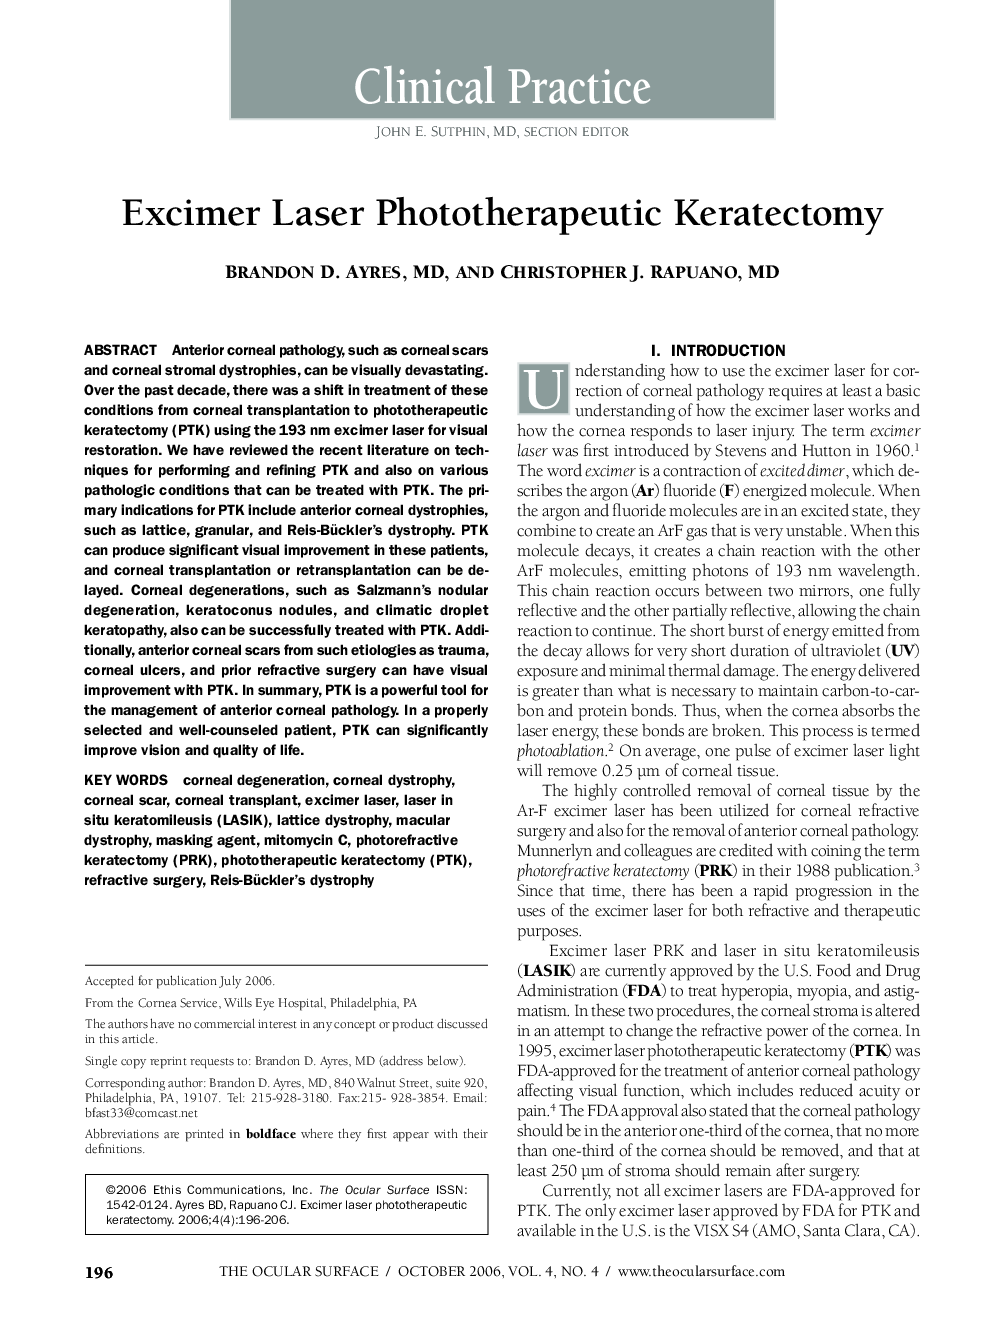 Excimer Laser Phototherapeutic Keratectomy 